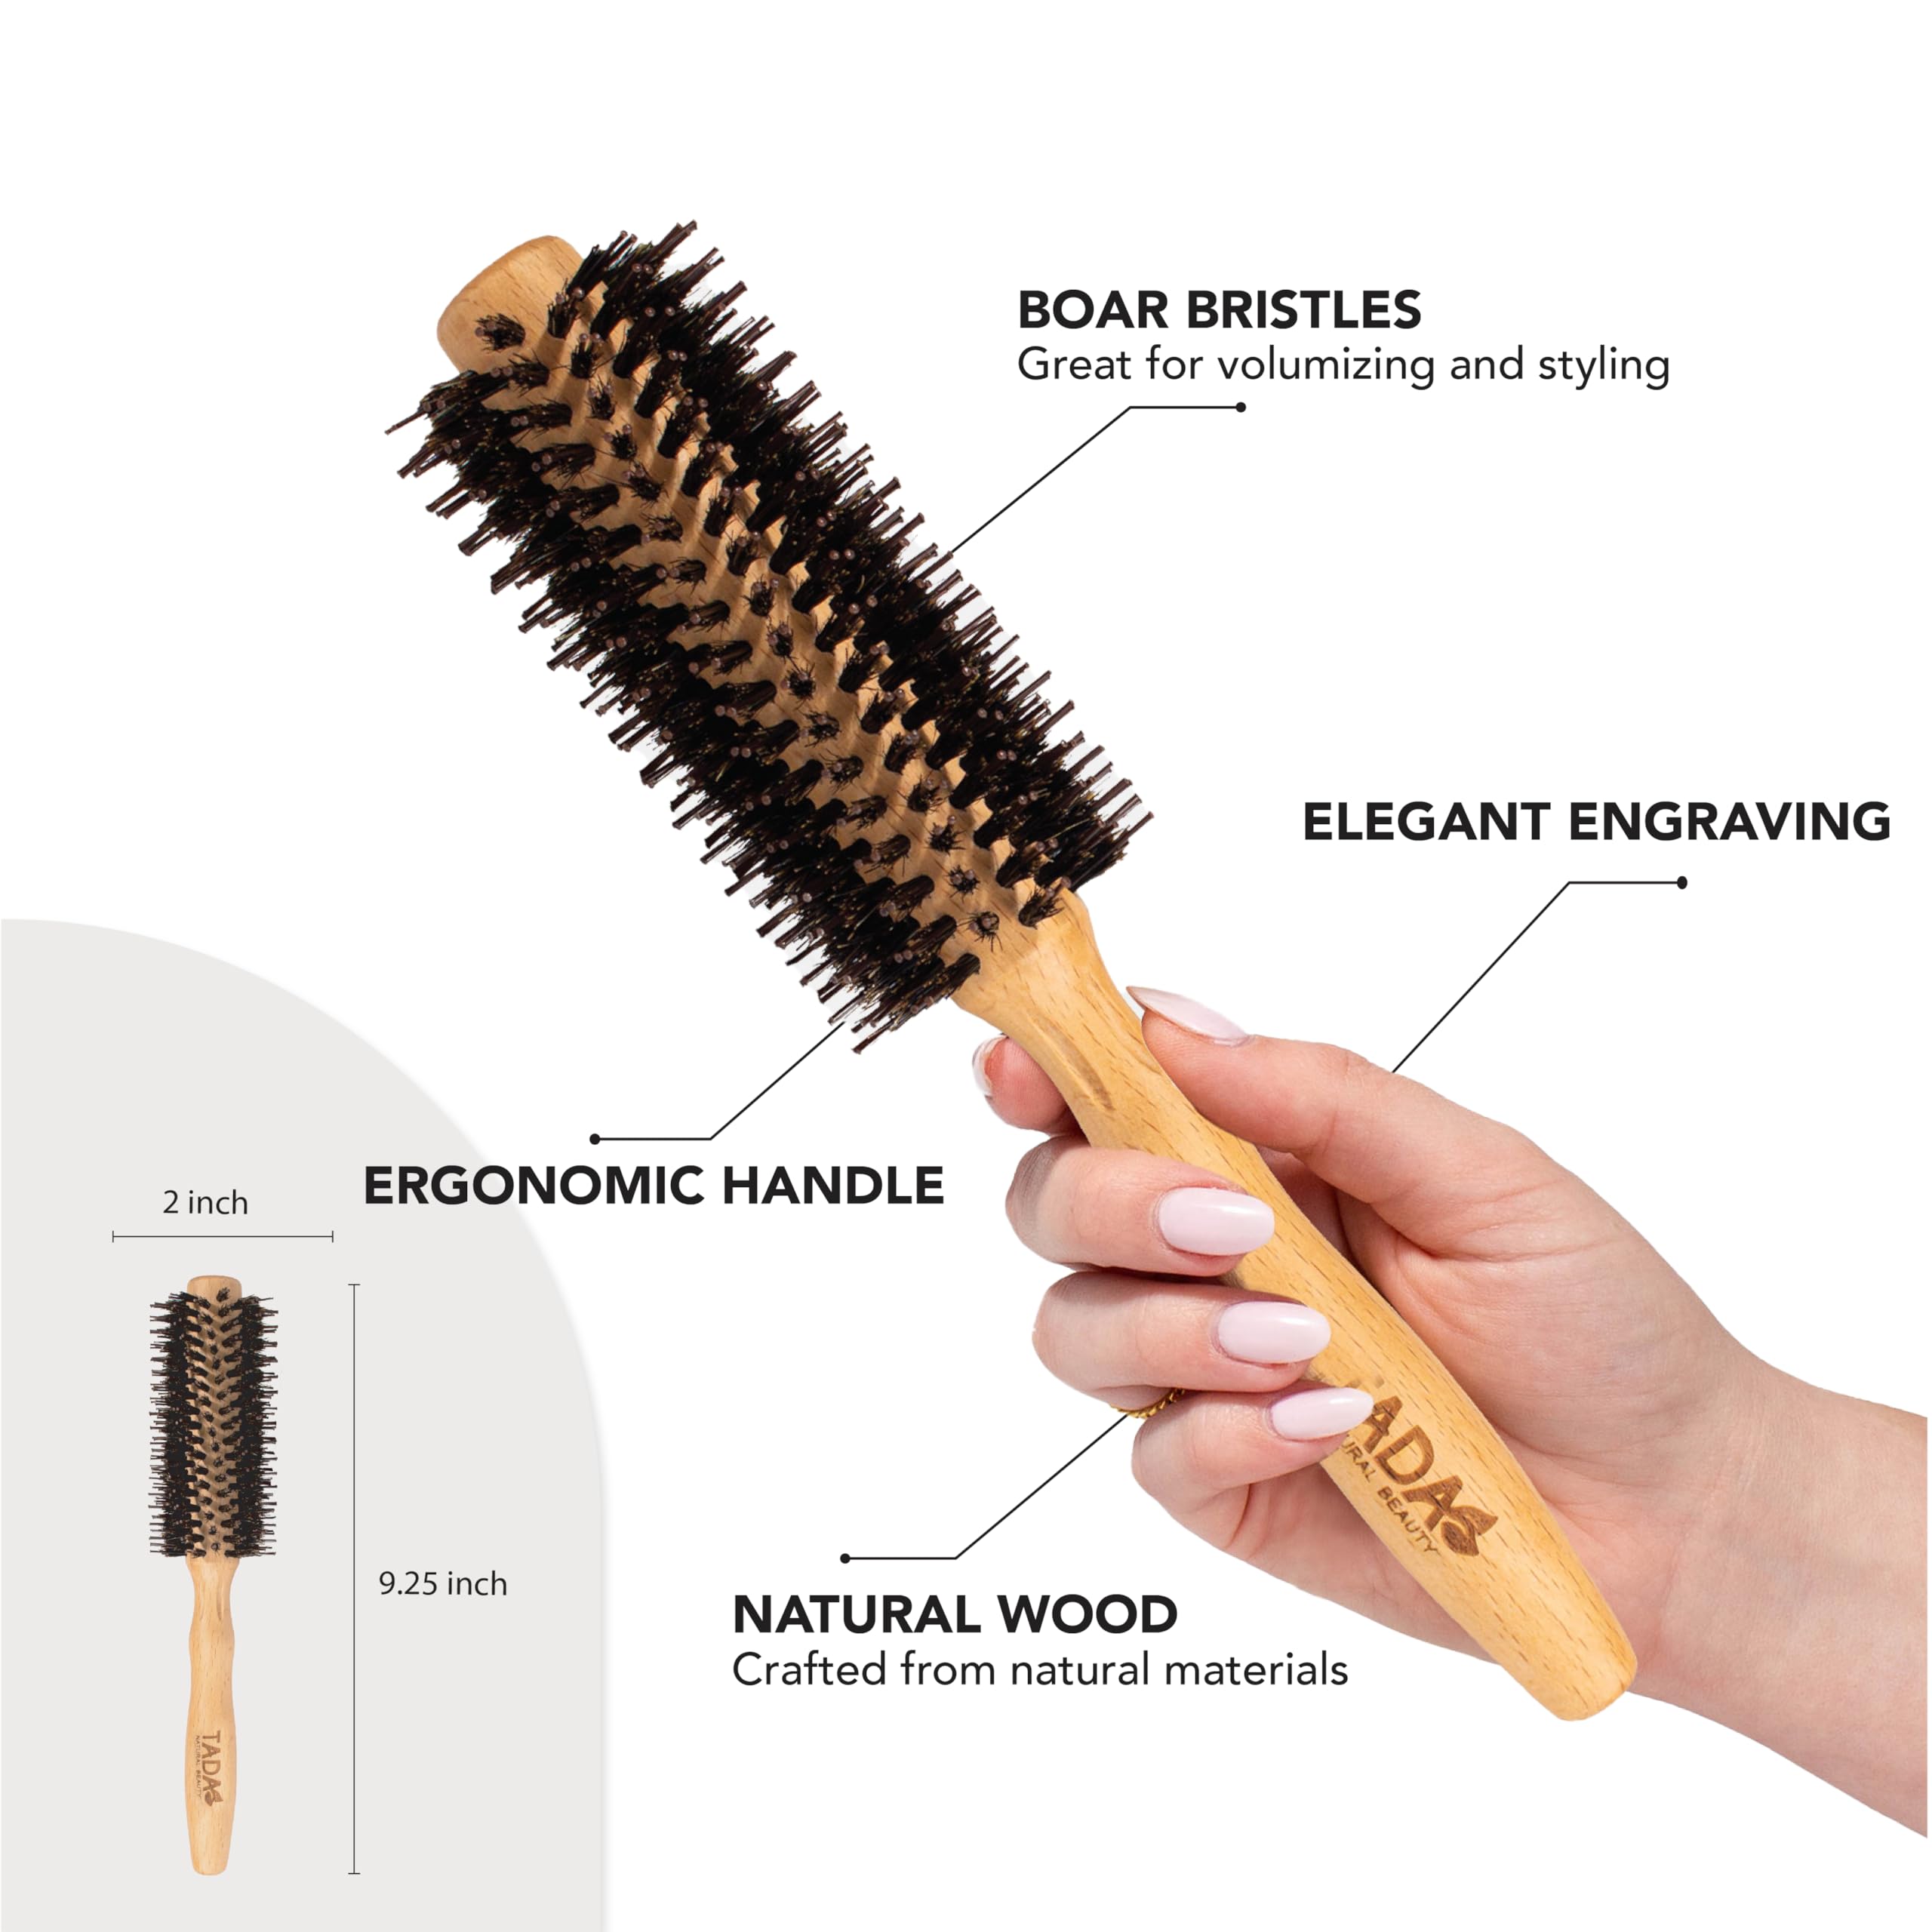 TADA Natural Beauty Bamboo Hair Brush l Wooden Comb l Bamboo Brushes for Wet Dry Curly Thick Straight Hair l Detangling Hairbrush for Women, Men, and Kids (Boar round brush)